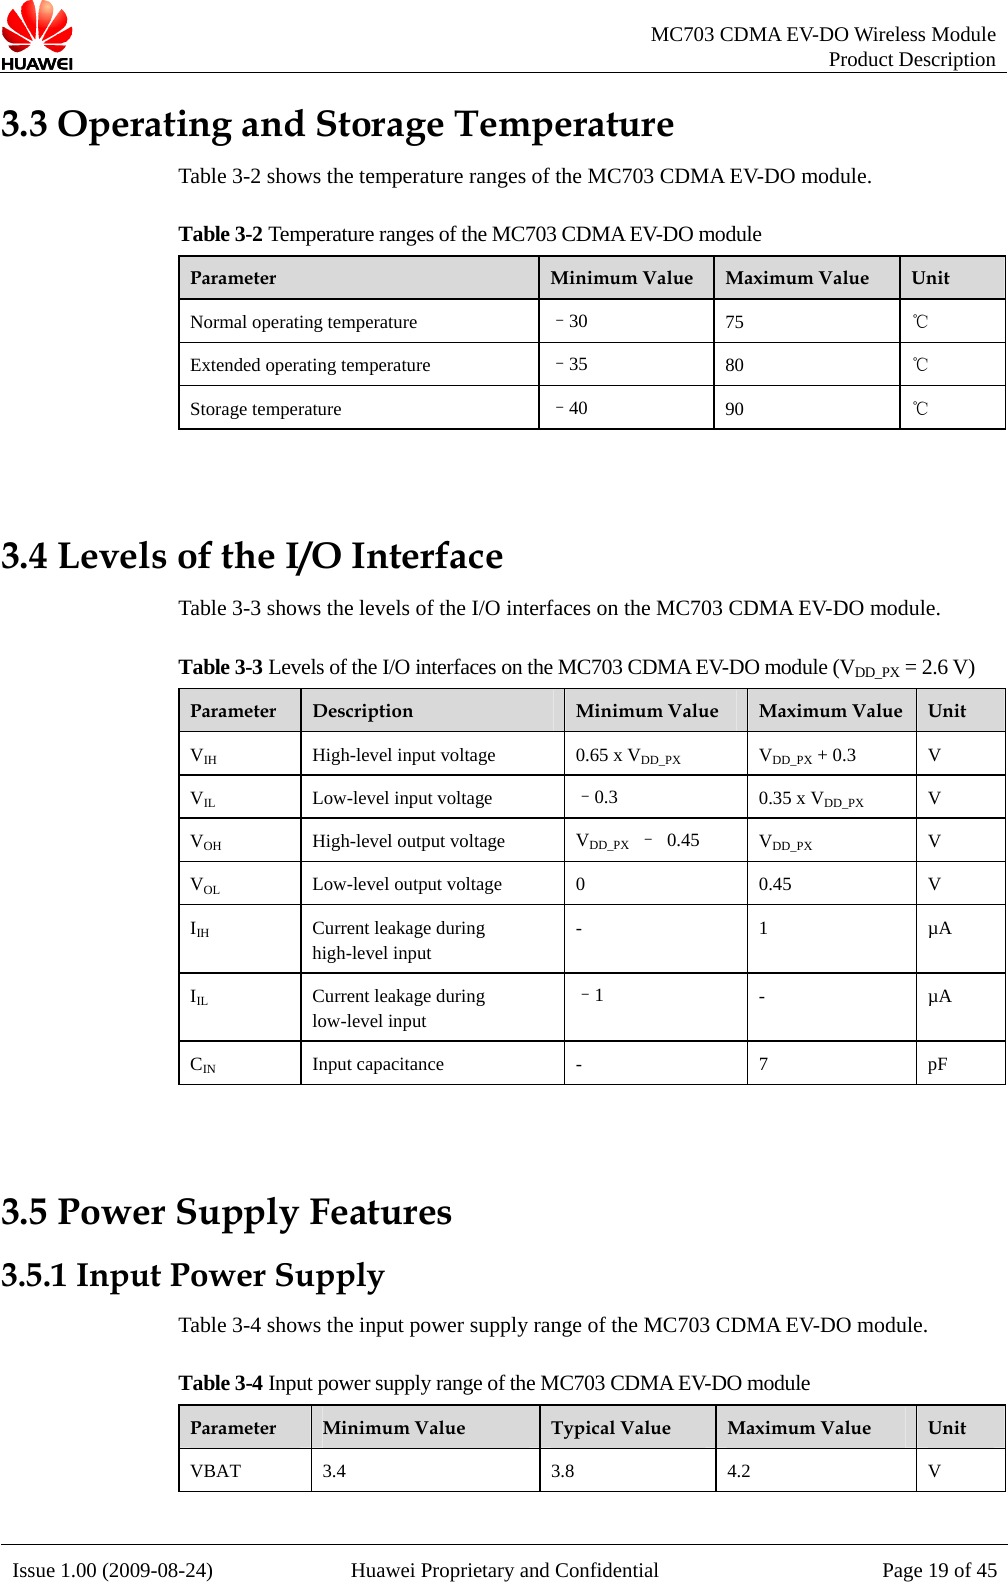   MC703 CDMA EV-DO Wireless Module Product Description Issue 1.00 (2009-08-24)  Huawei Proprietary and Confidential Page 19 of 453.3 OperatTa ws the temperature ranges ofTf the MC703 CDMA EV-DO moing and Storage Temperature ble 3-2 sho  the MC703 CDMA EV-DO module. able 3-2 Temperature ranges o dule Parameter  Minimum Value  Maximum Value  Unit Normal operating temperature  –30  75 ℃ Extended operating temperature  –35  80  ℃ Storage temperature  –40  90  ℃  3.4 Levels Ta nterfaces CDMTable 3-3 Leve on the M DMA EV-DO  (V PX =  V) of the I/O Interface ble 3-3 shows the levels of the I/O i  on the MC703  A EV-DO module.   ls of the I/O interfaces  C703 C  module DD_ 2.6 Parameter  Description  M um Valueinim   Maximum Value  Unit VIH High-level input voltage  0.65 x VDD_PX X + 0.3 VDD_P V VIL Low-level input voltage  –0.3  5 x VDD_PX0.3 V VOH t voltage  VDD_PX – 0.45  VDD_PX V High-level outpuVOL e  45 Low-level output voltag 0  0. V IIH Current leakage during high-level input - 1 µA IIL Current leakage during low-level input –1  - µA CIN Input capacitance  -  7  pF  3.5 Power 3.5.1 Input PTa ws the  ply ra 703 CD e. le 3-4 Input power supply range of the MC703 CDMA EV-DO module Supply Features ower Supply ble 3-4 sho input power sup nge of the MC MA EV-DO modulTabParameter  Minimum Value  Typical Value  Maximum Value  Unit VBAT 3.4  3.8  4.2  V  